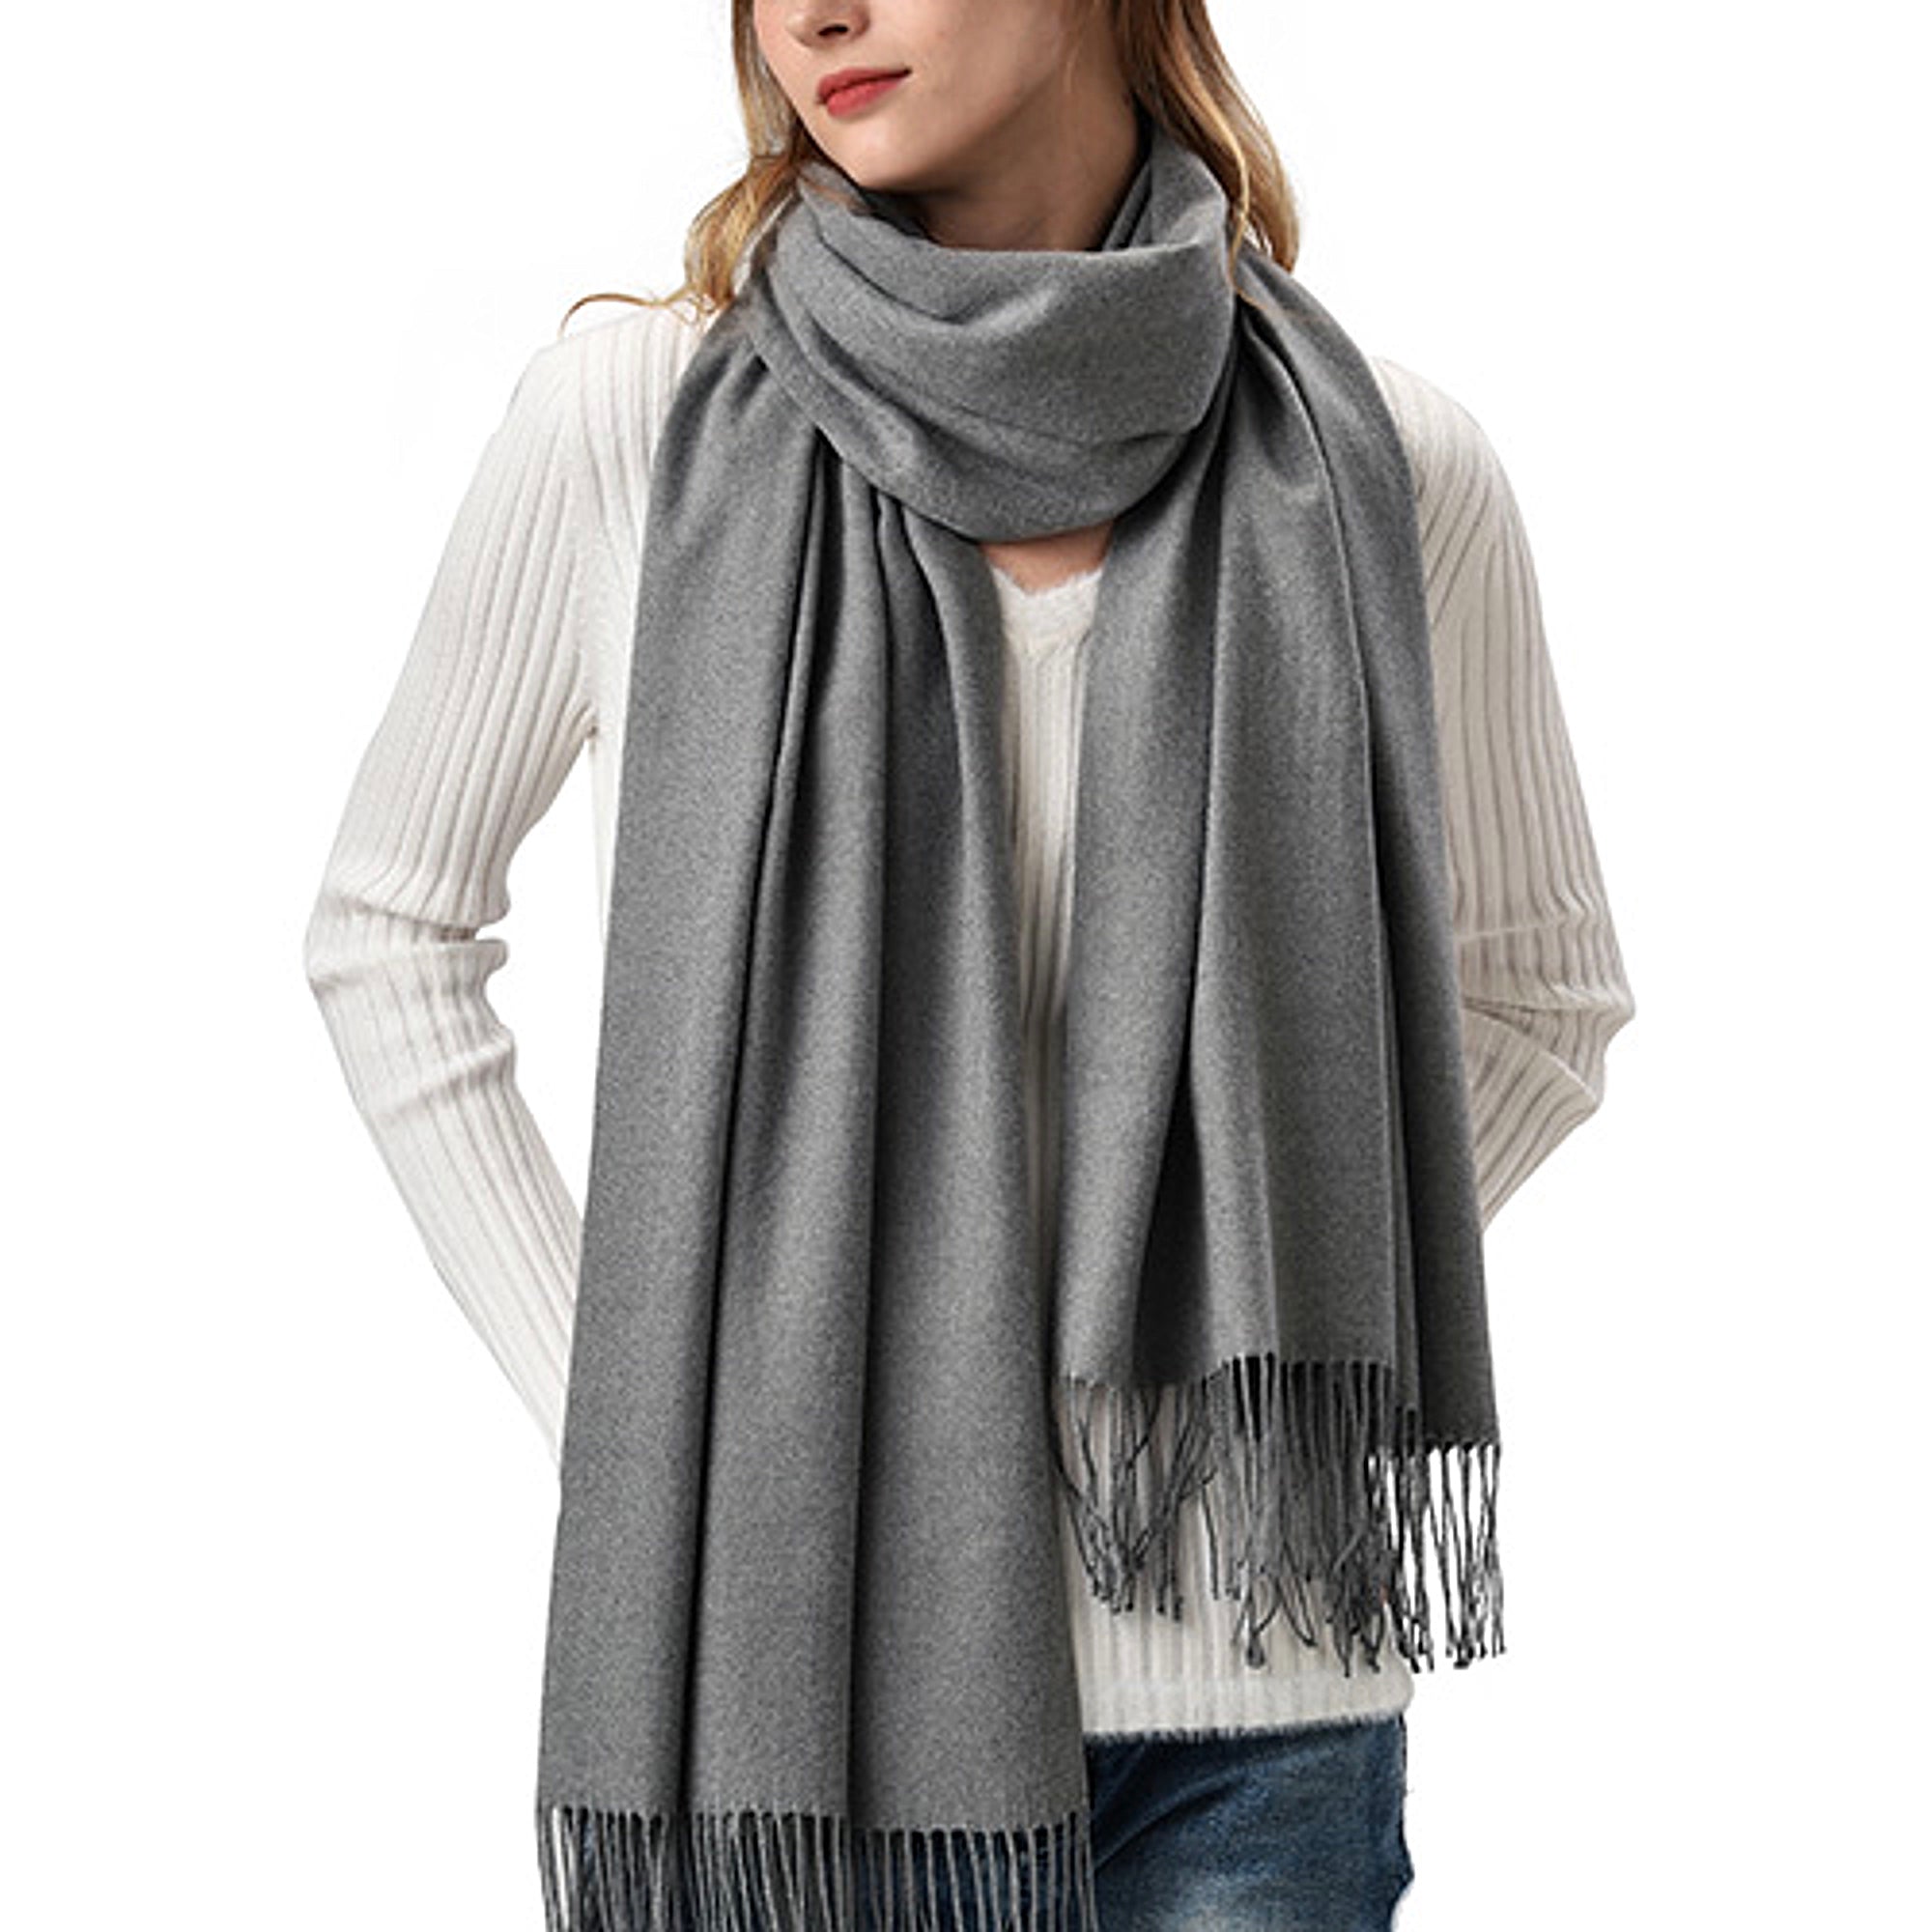 Cashmere Unisex Long scarf, Elegant and Stylish for Office wear and ...